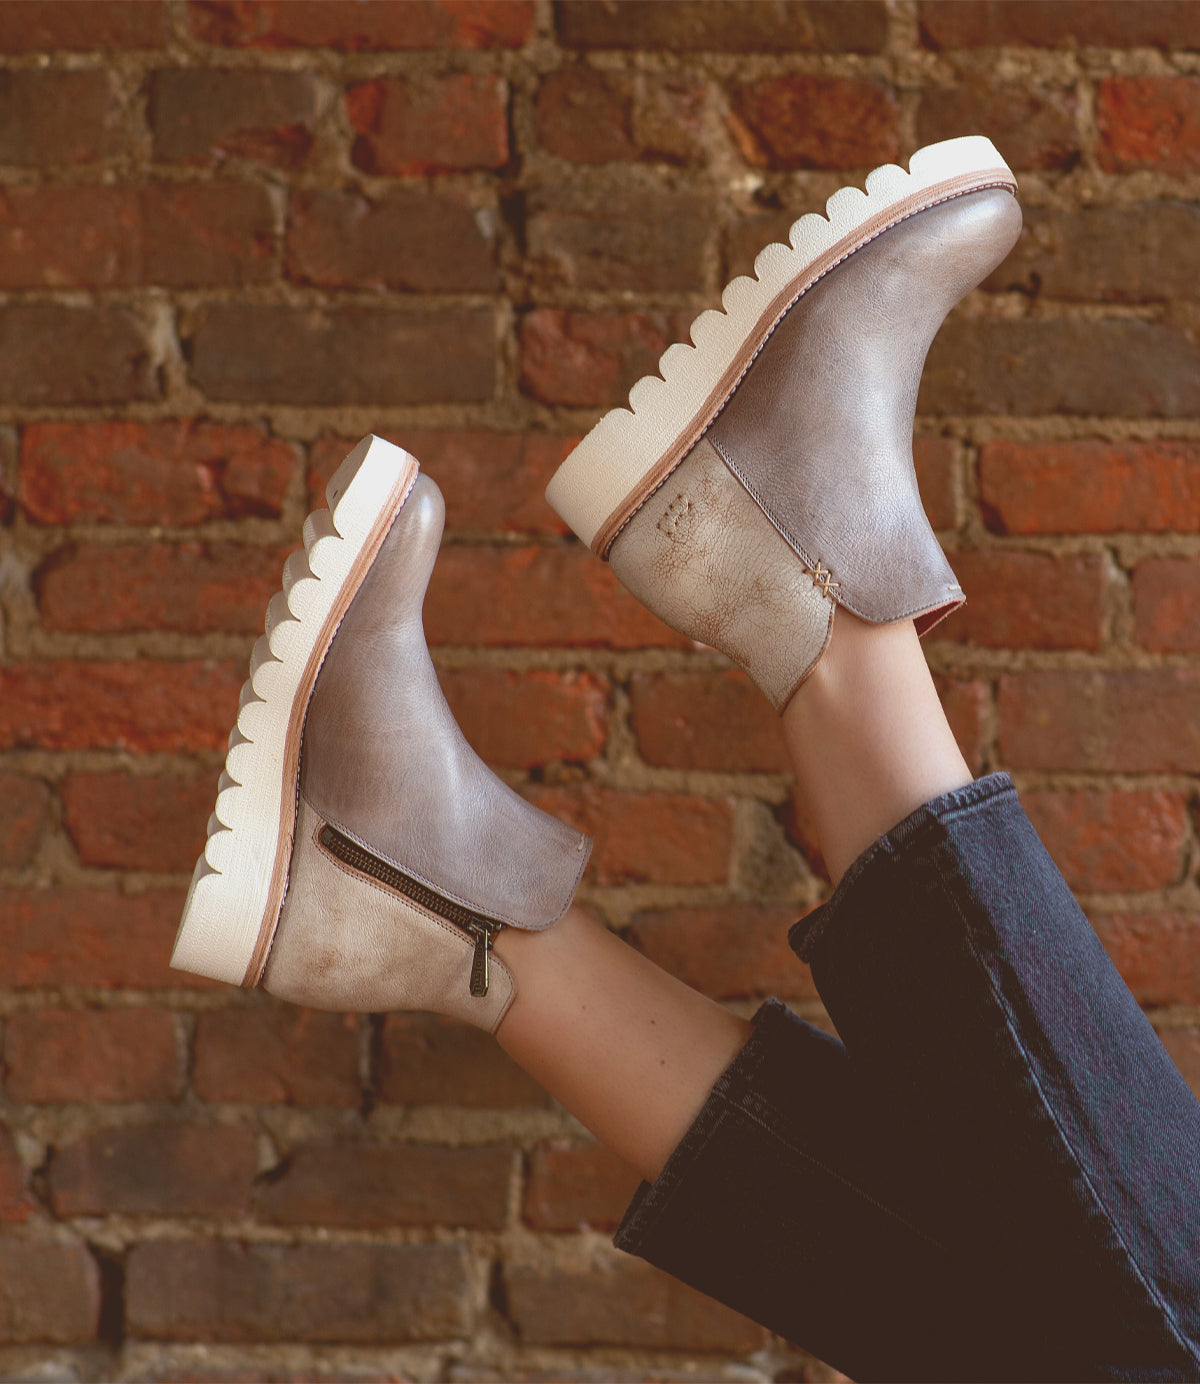 A versatile woman's legs in a pair of Bed Stu Lydyi ankle boots against a brick wall.